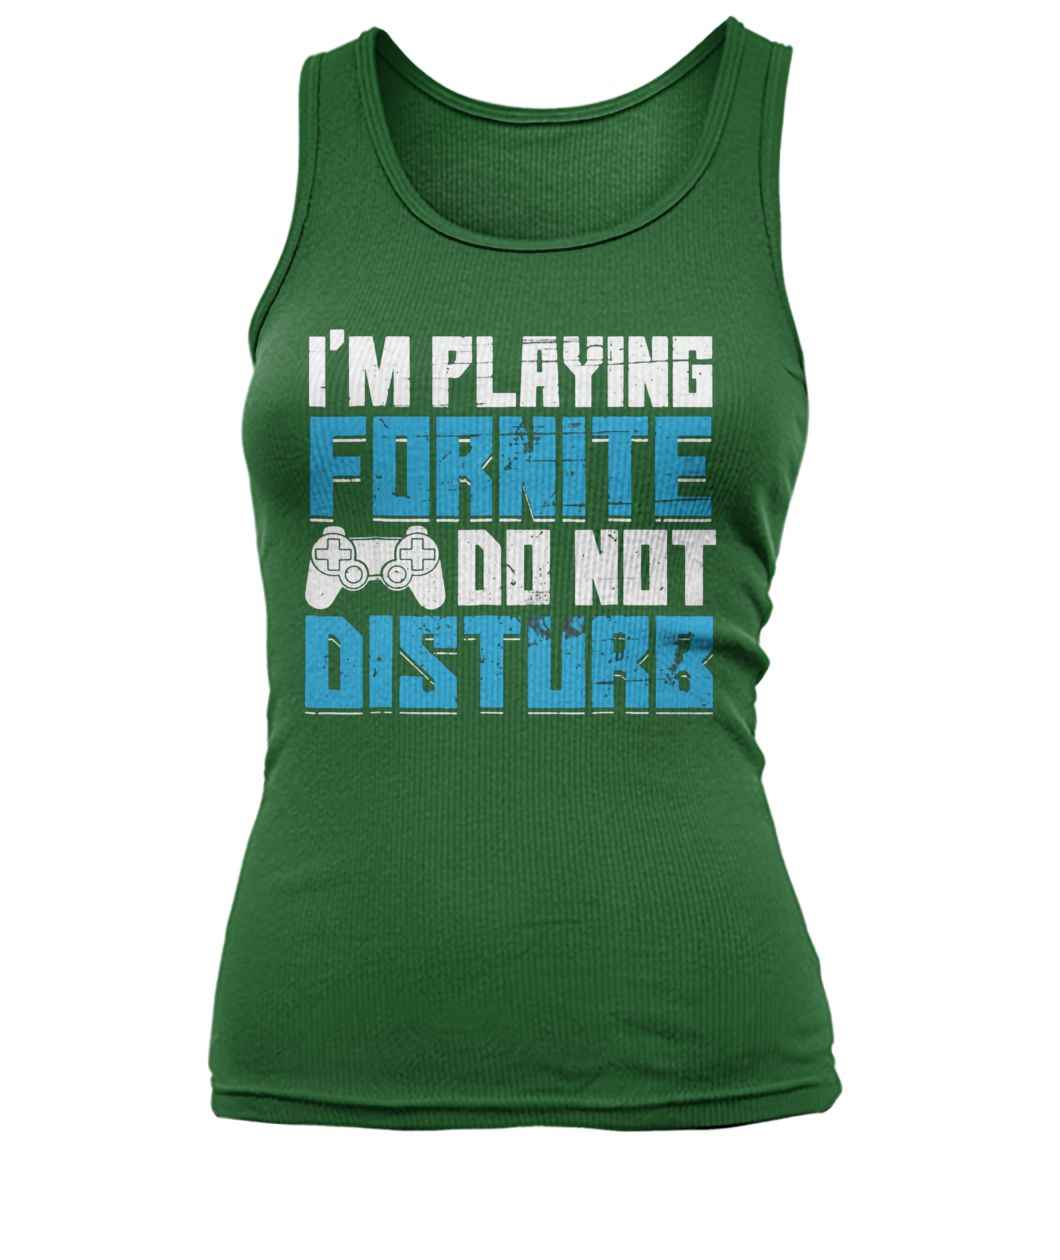 I'm playing fornite do not disturb women's tank top